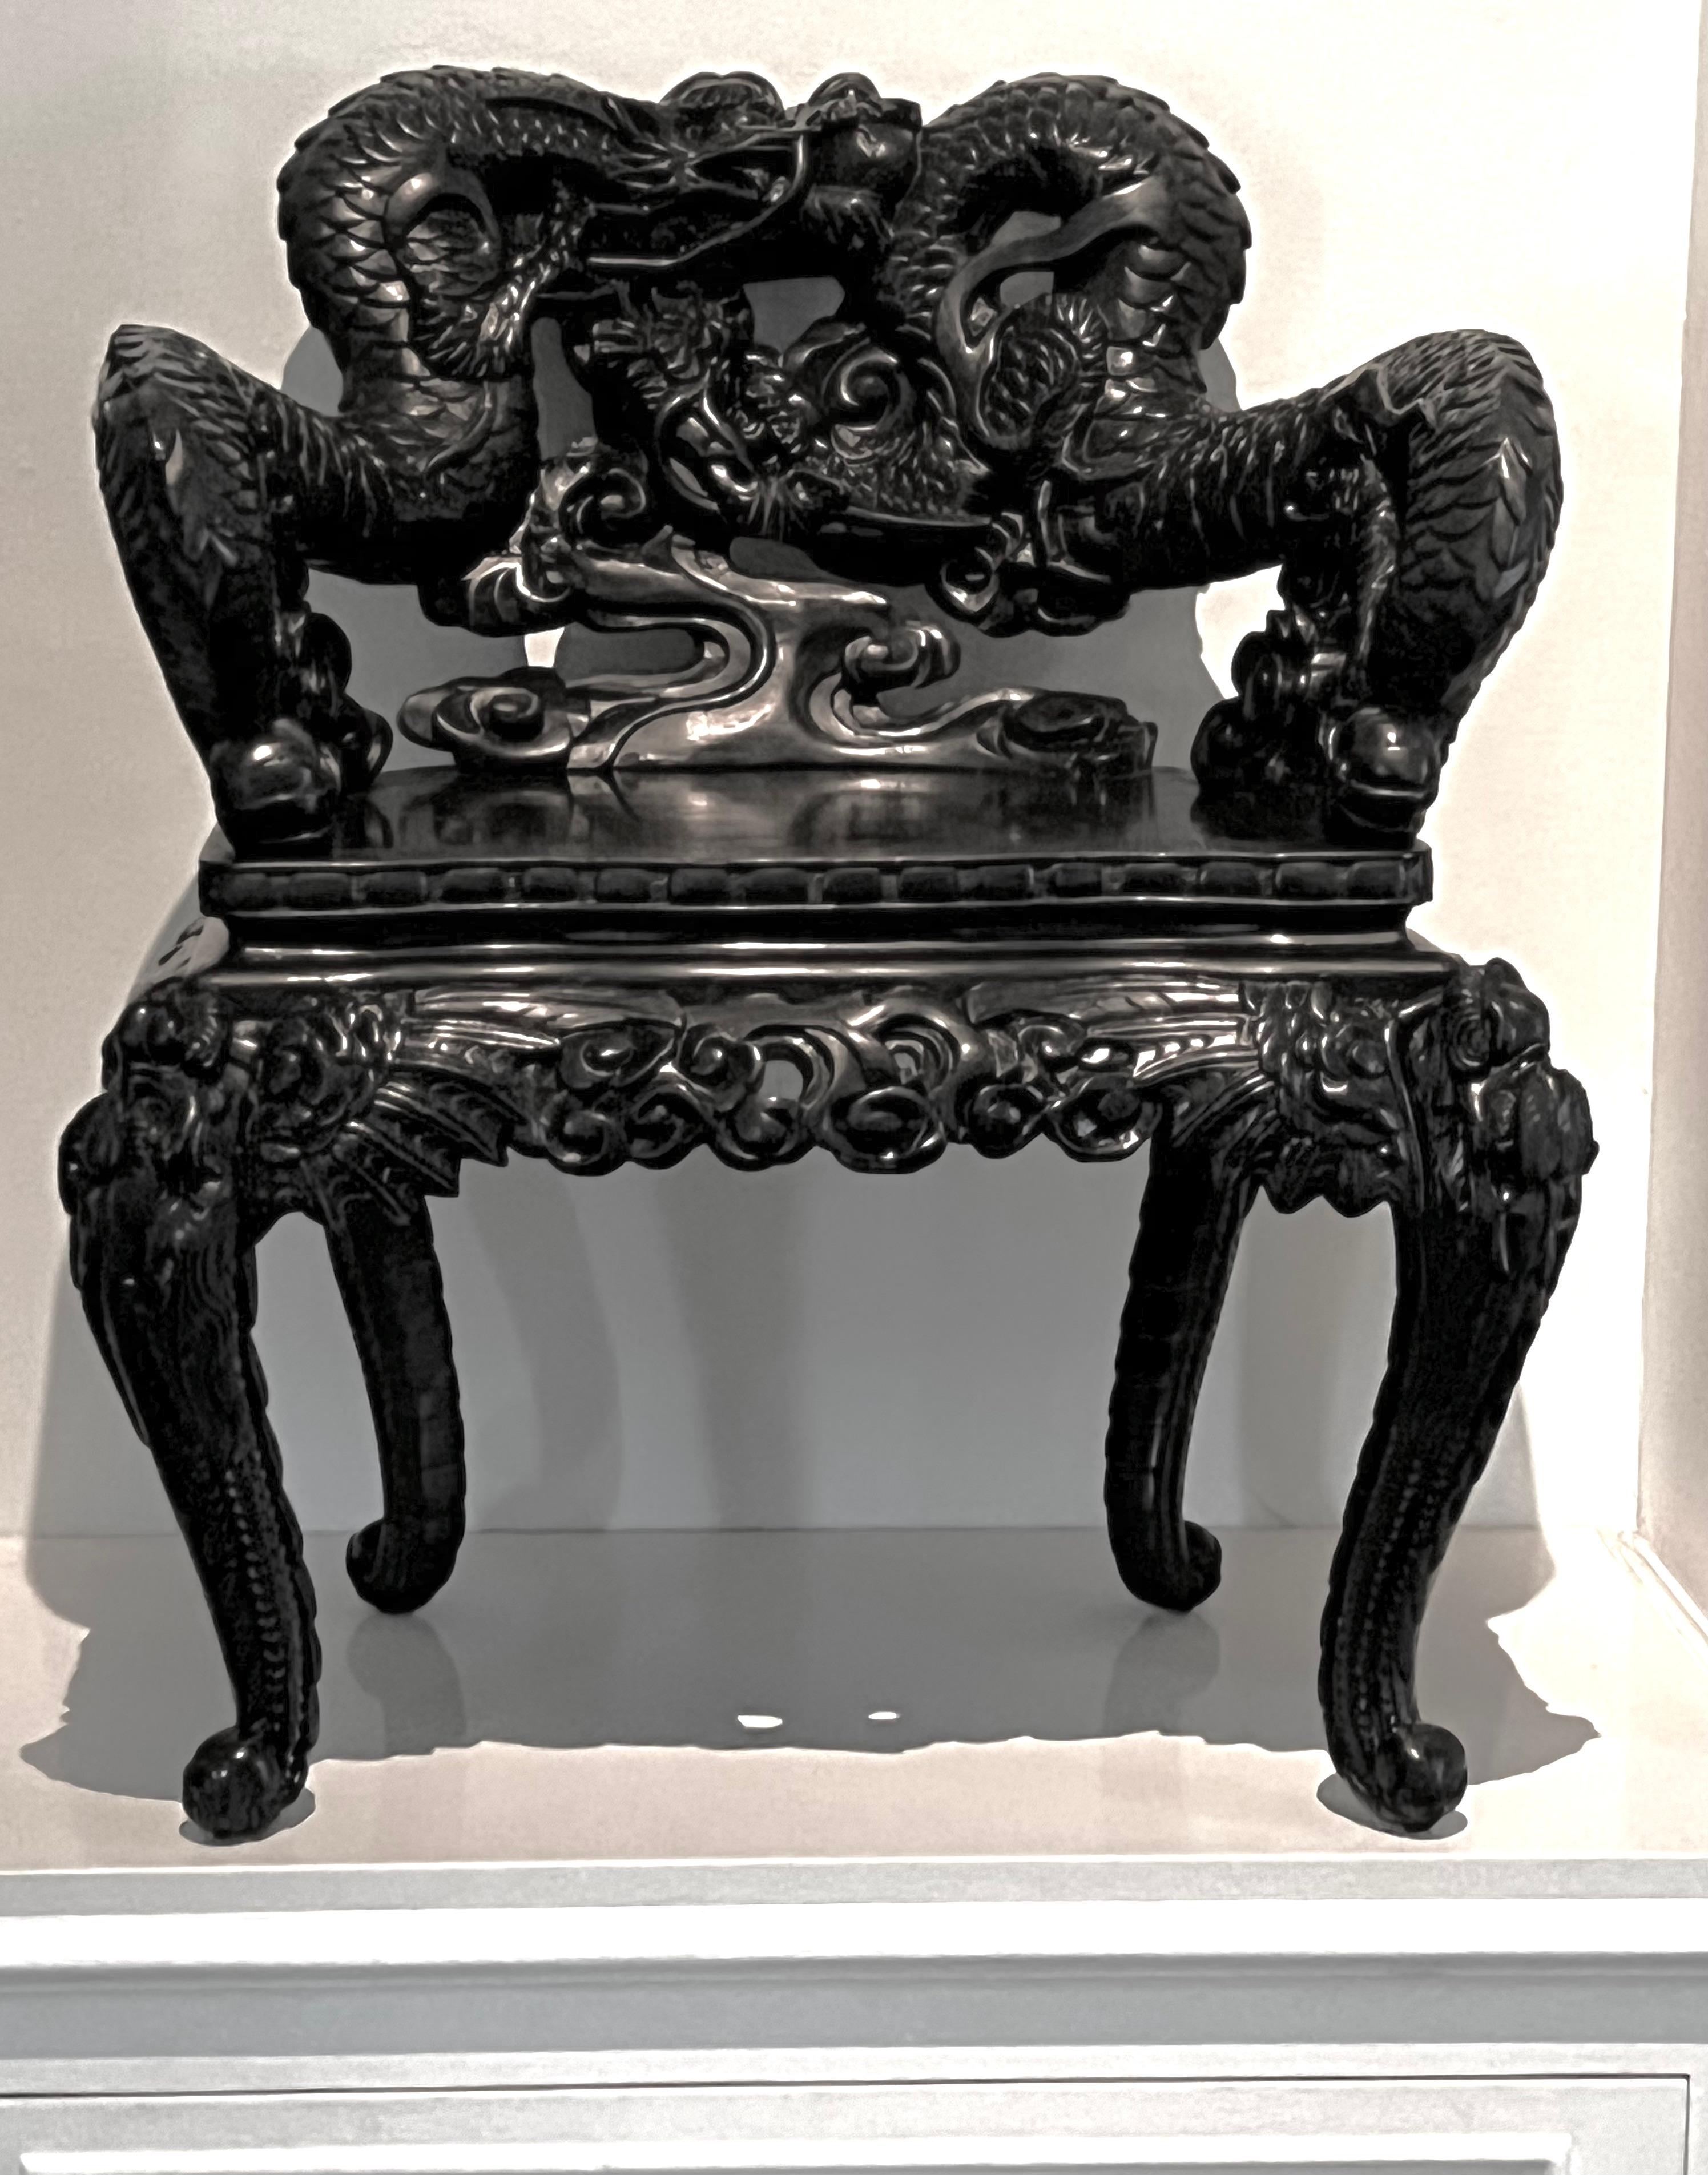 A beautiful representation of Chinese craftsmanship. Hand carved with dragons and bats, a unique piece that will make a wonderful side chair or focal point in many spaces from traditional to modern. Definitely a conversation piece with many